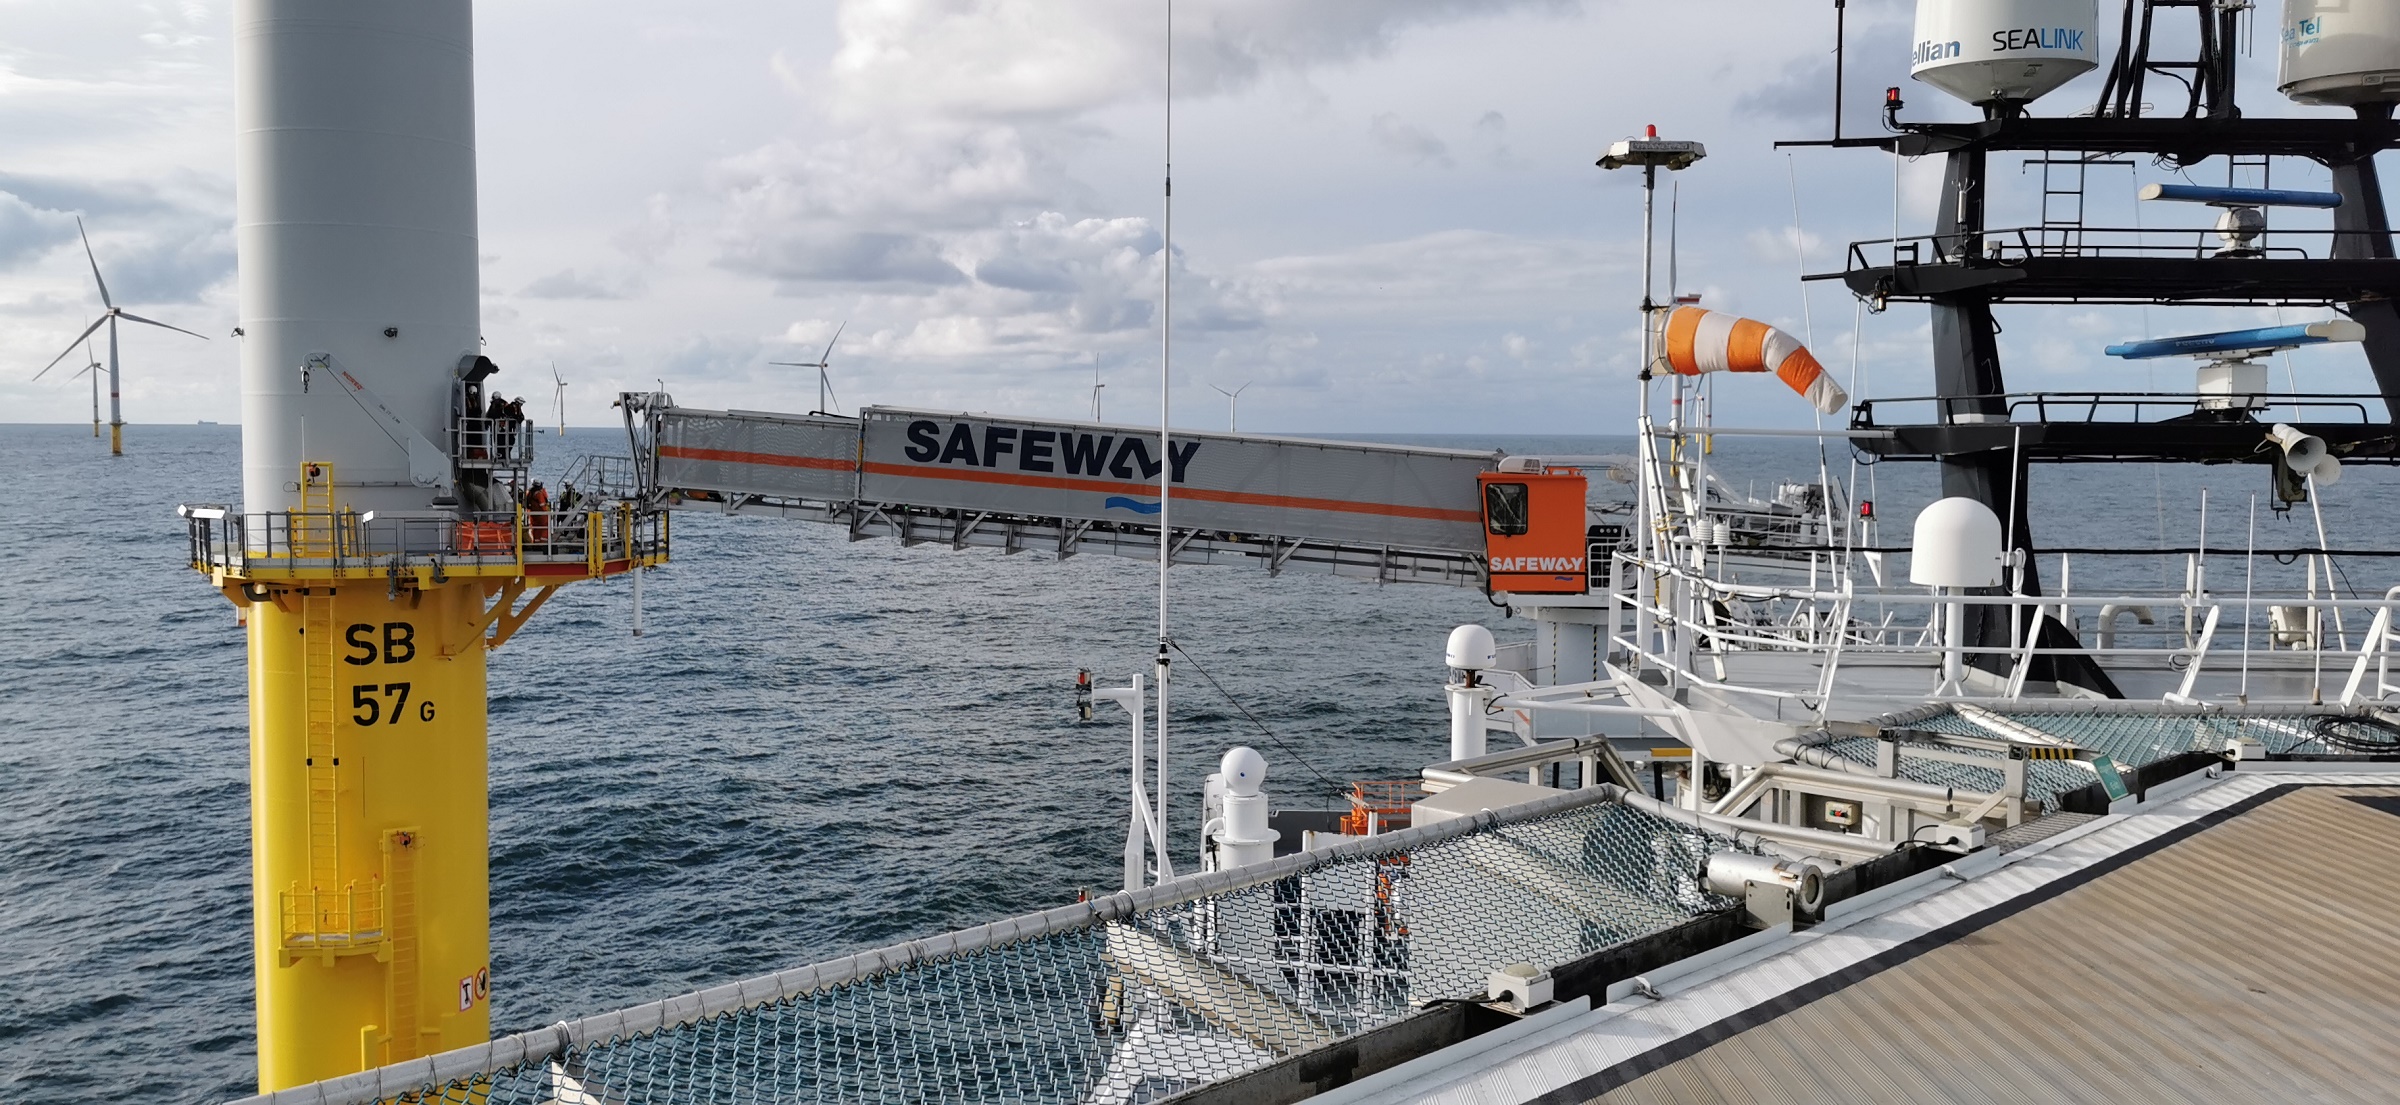 Olympic Shipping and Safeway join forces again for Sandbank wind farm project